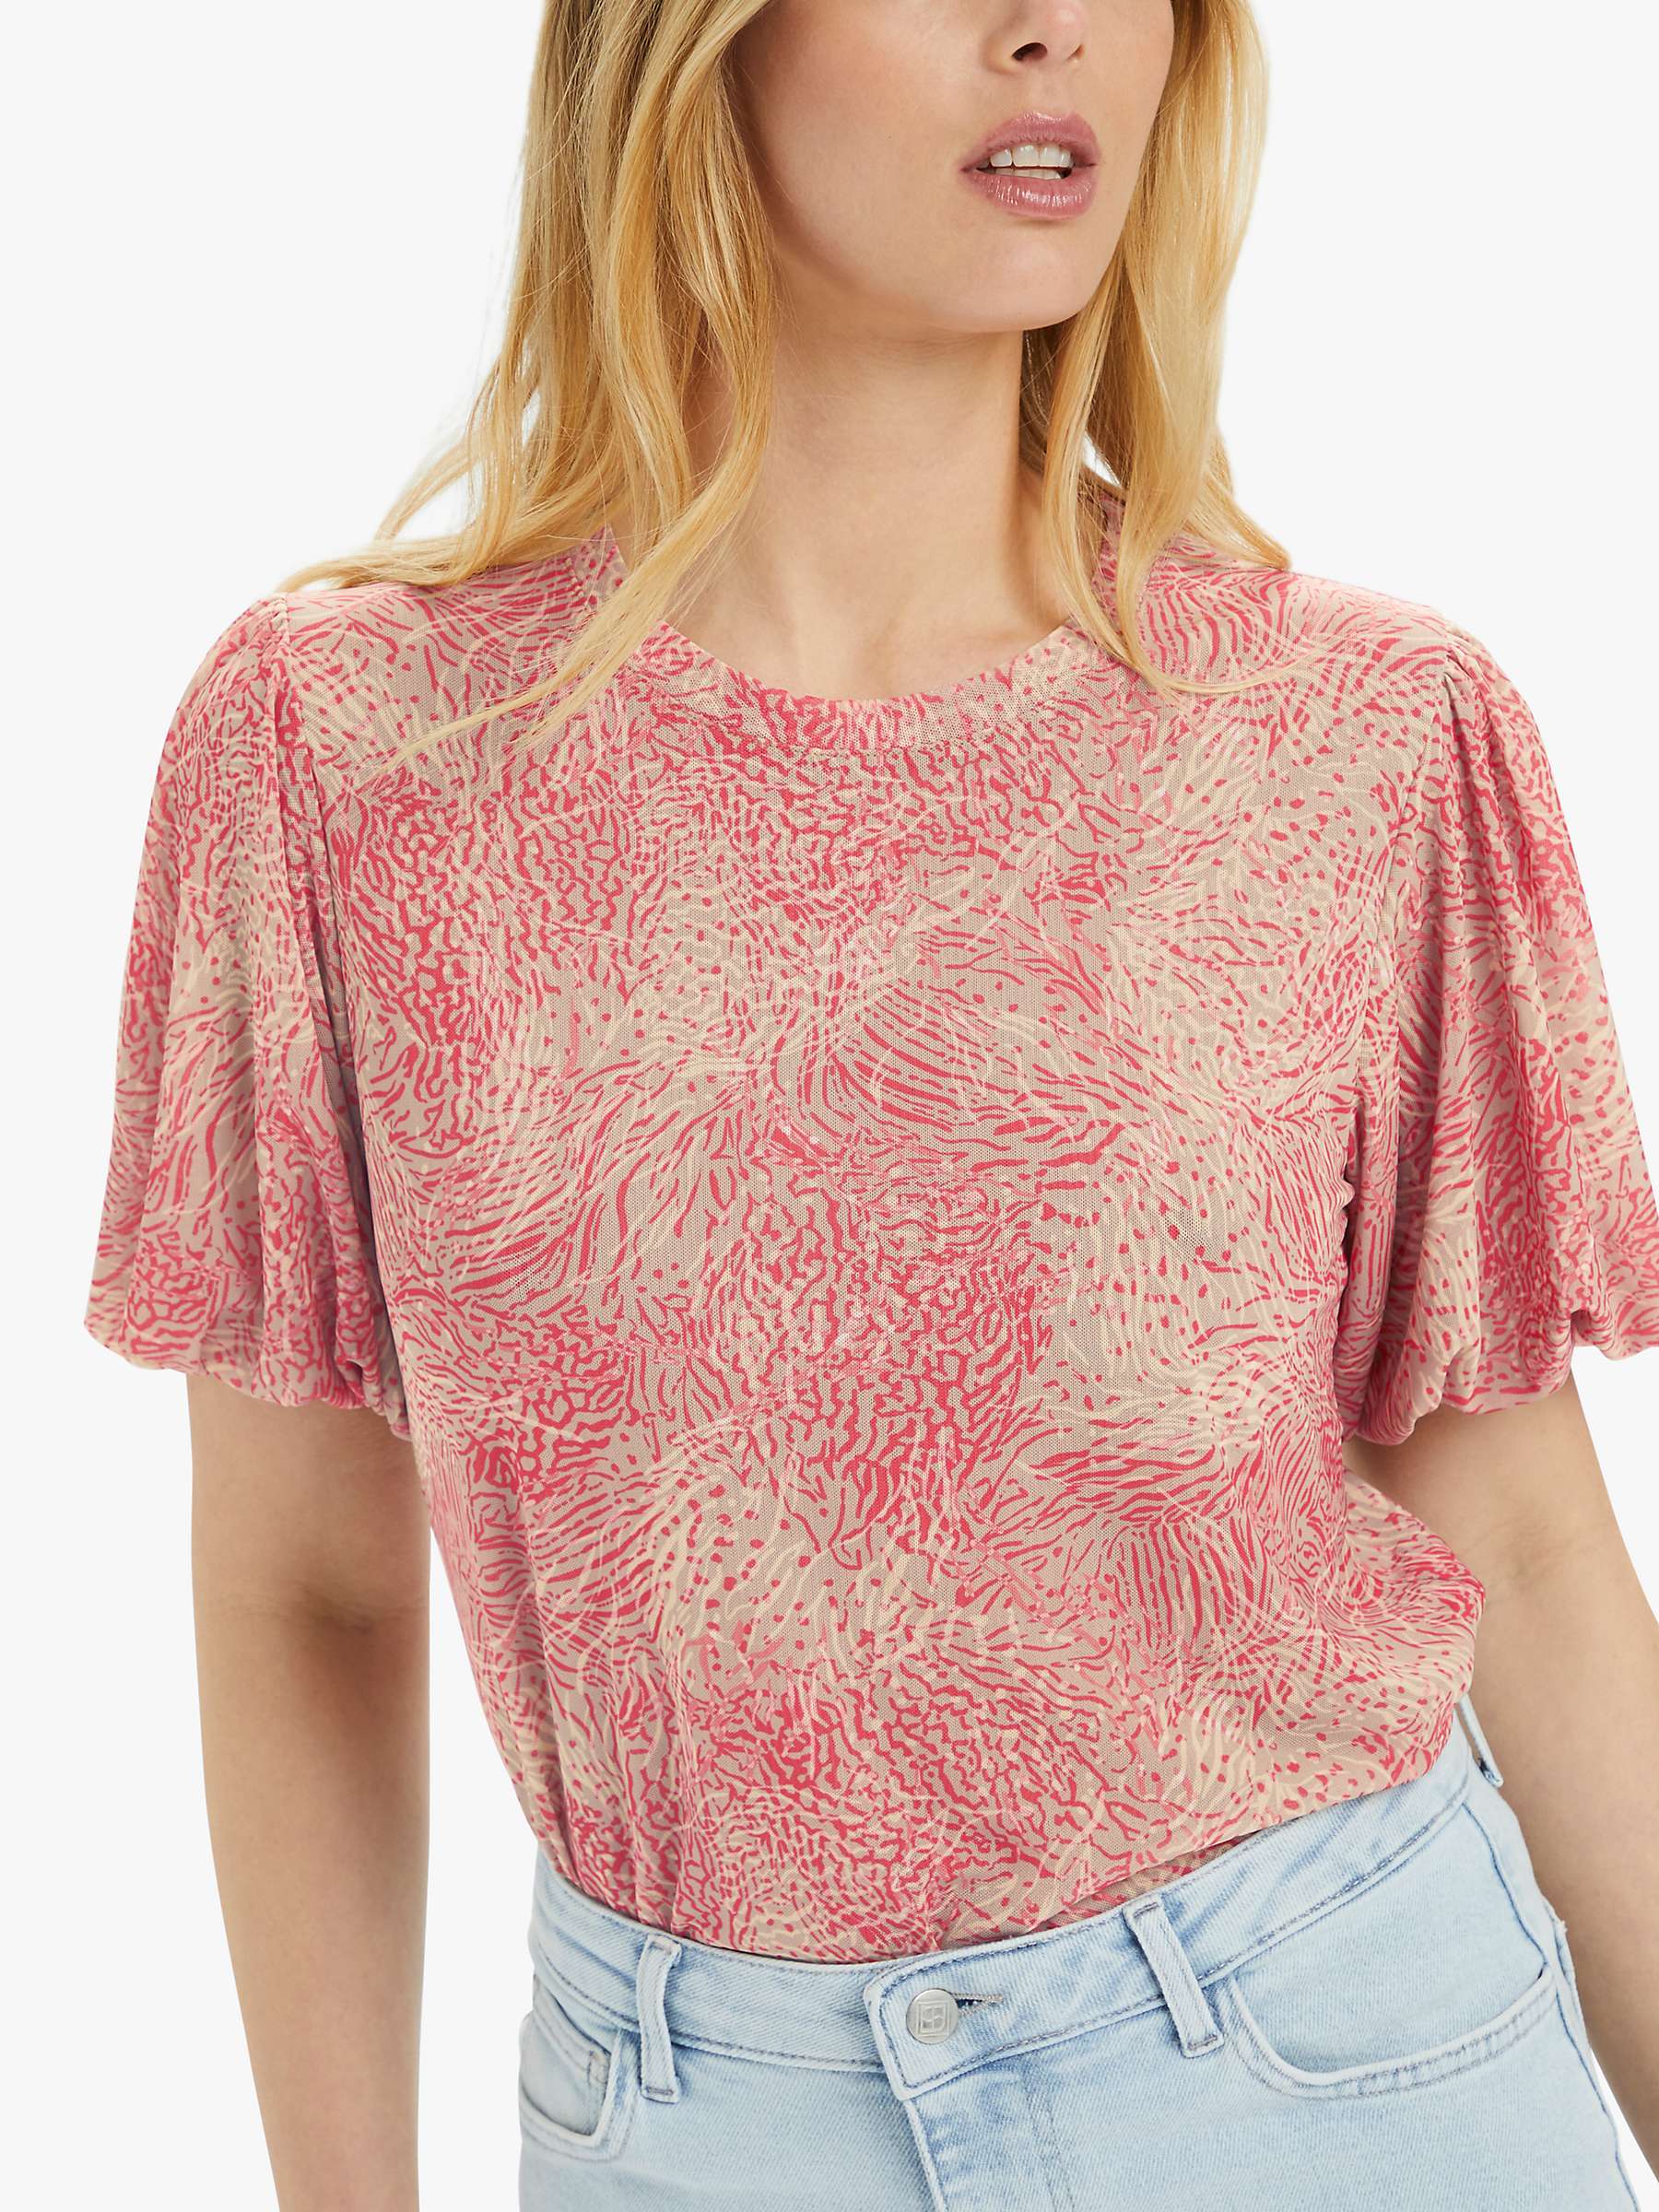 Buy Soaked In Luxury Ila Abstract Print Puff Sleeve T-Shirt, Multi Online at johnlewis.com